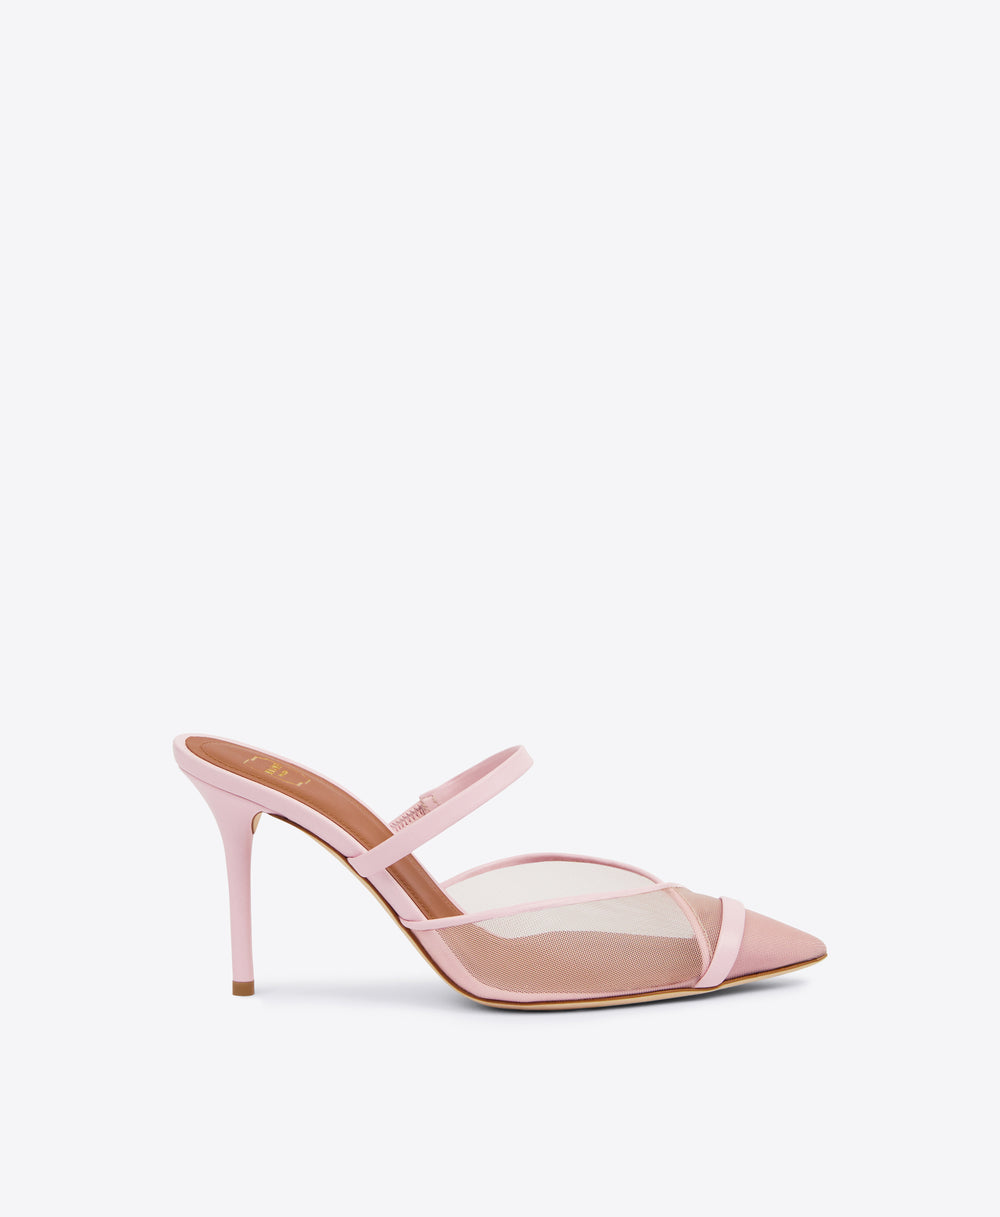 Designer Bridal & Wedding Shoe Collection | Malone Souliers